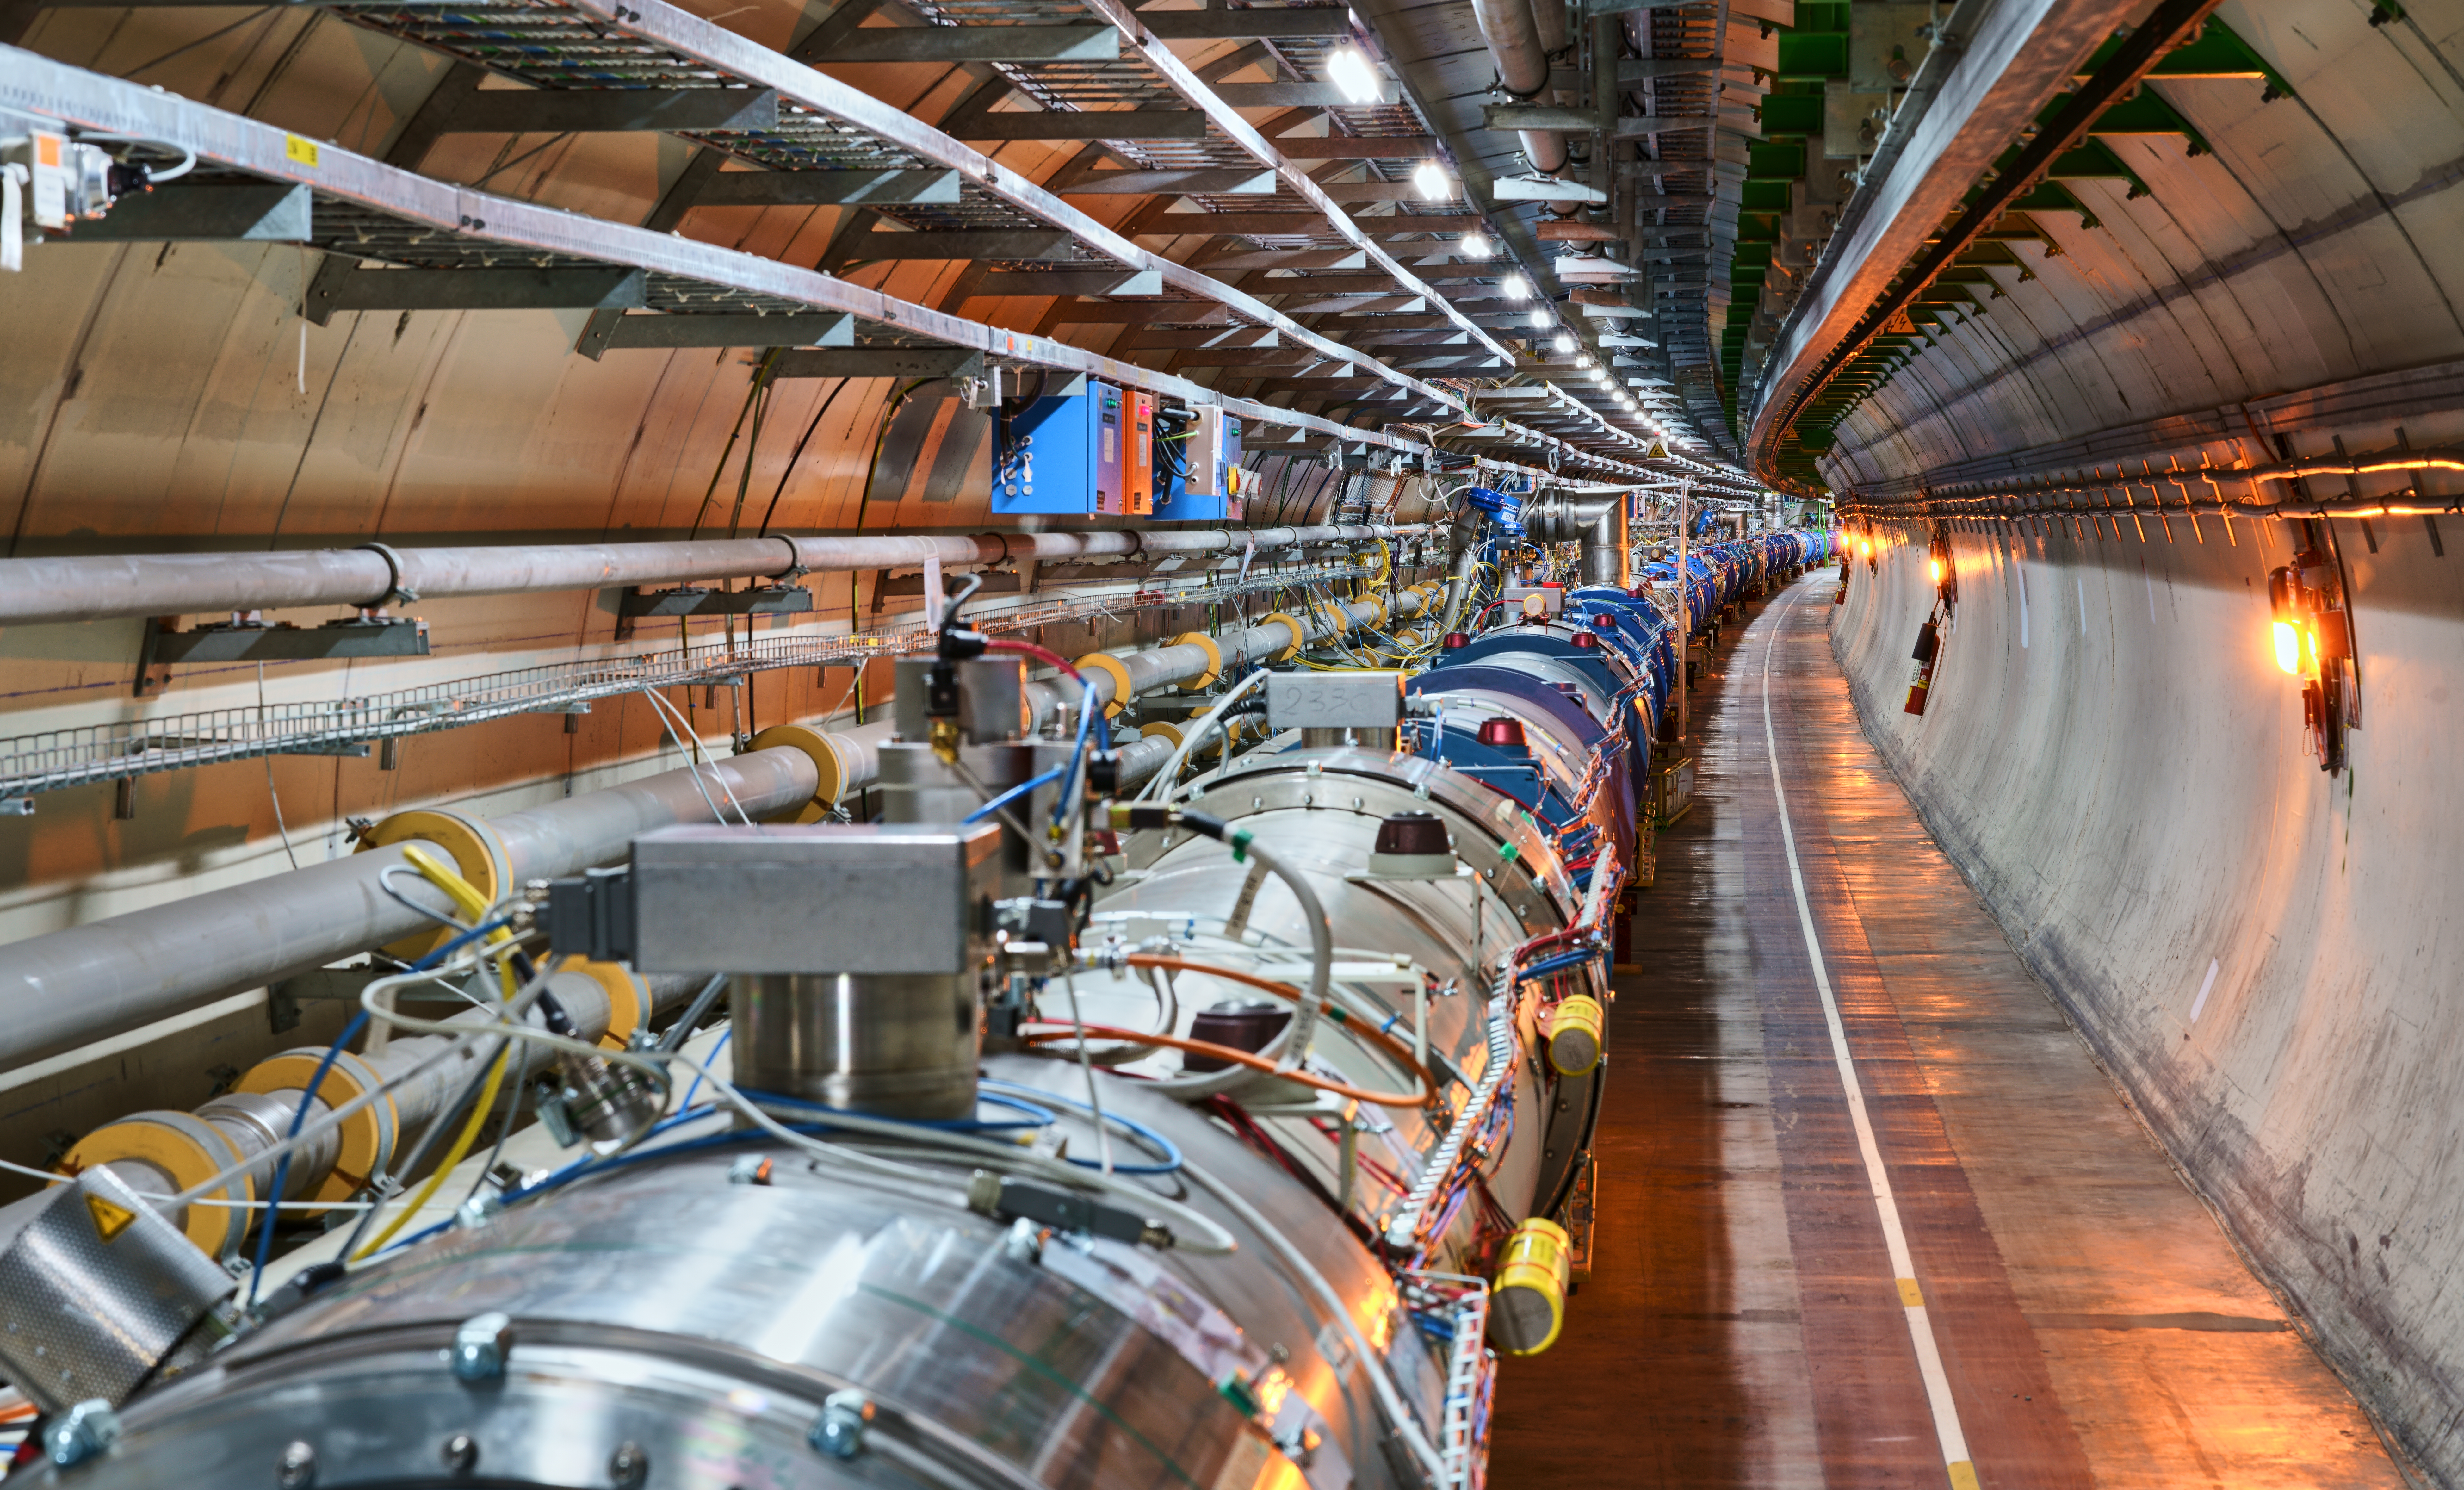 An image of the Large Hadron Collider at CERN